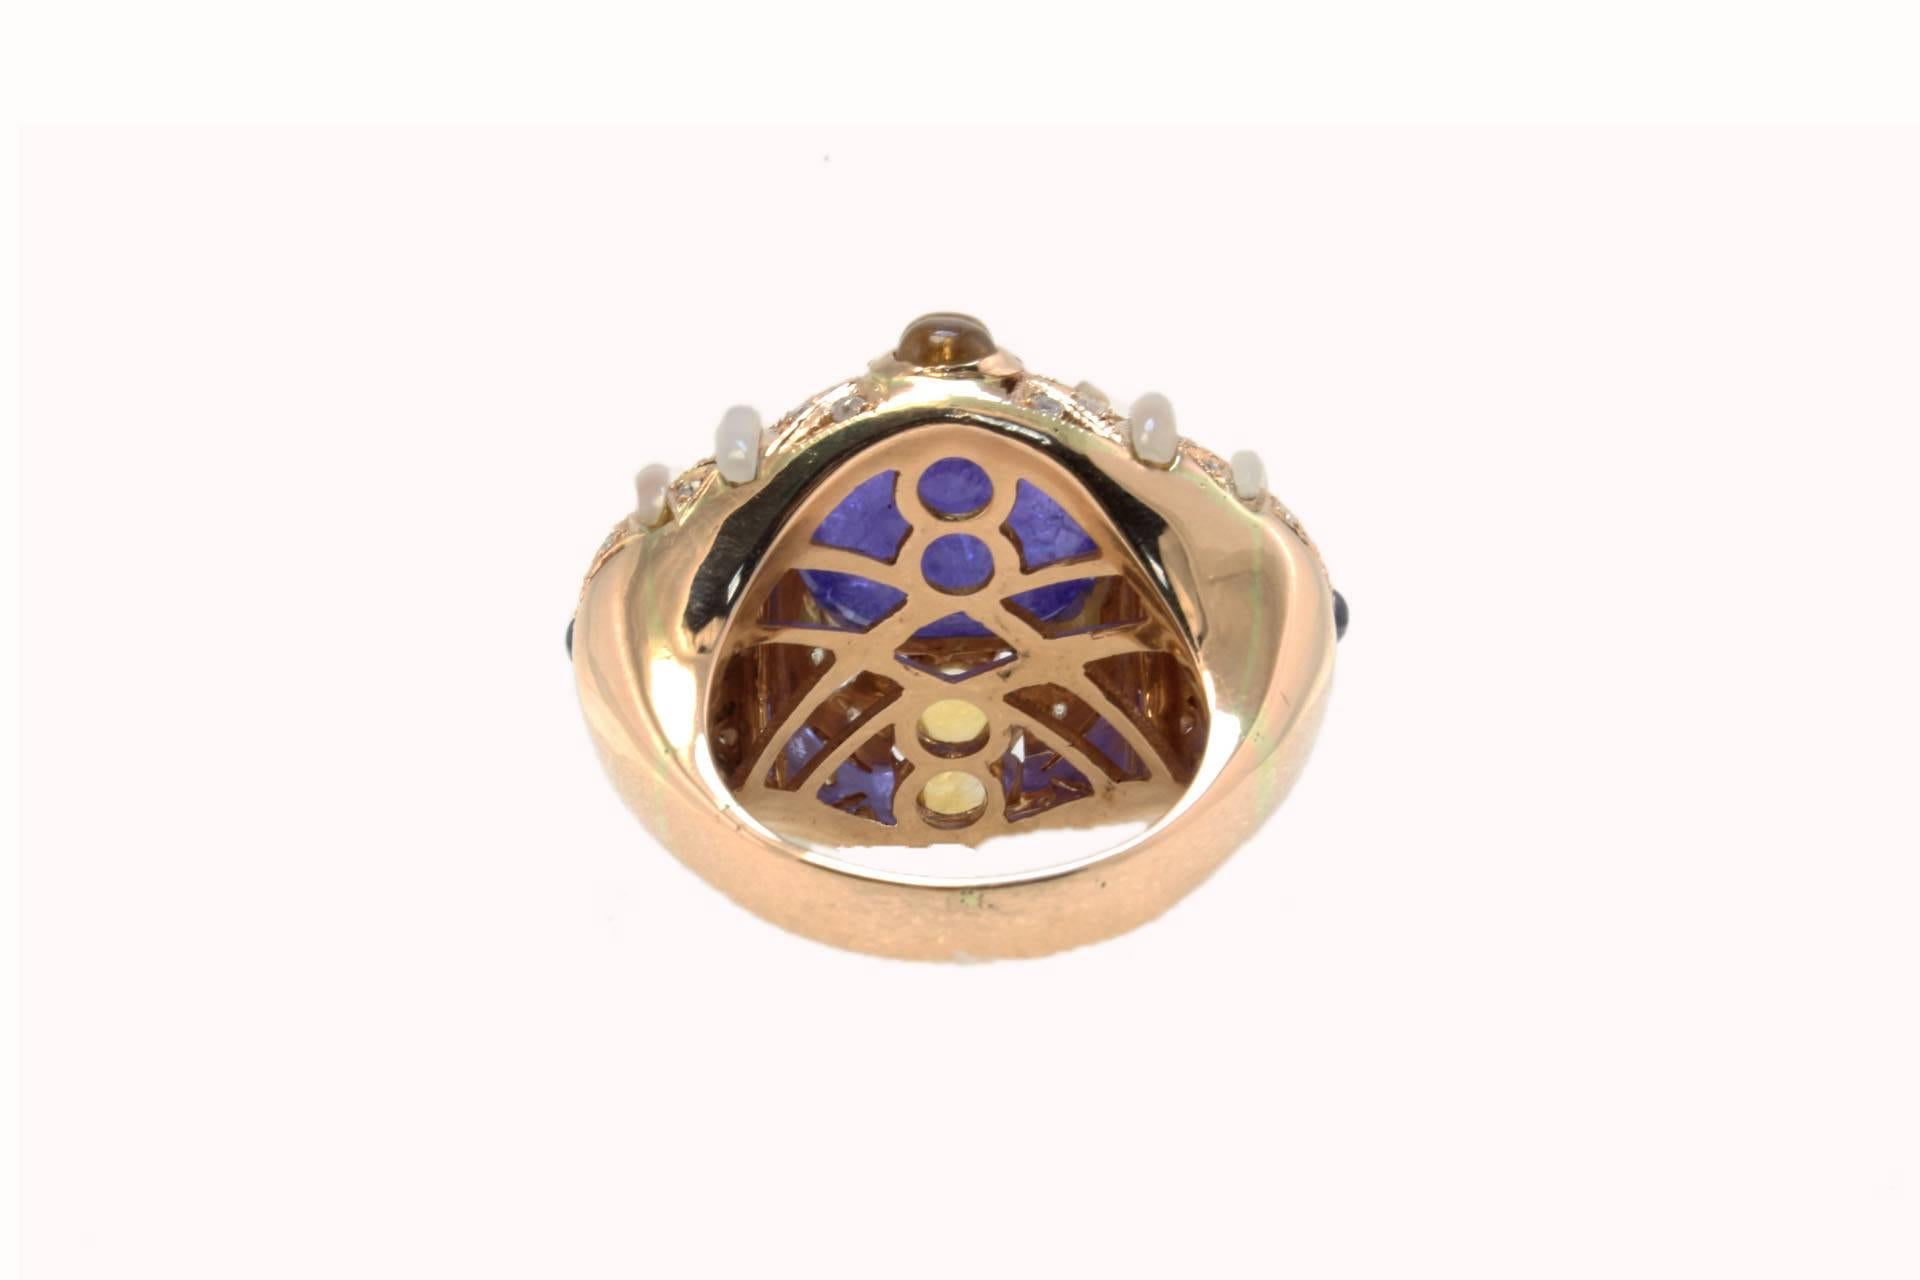 Retro Rose Gold, Diamonds, Tanzanite, Sapphire, Mother-of-Pearl and Topazes Ring